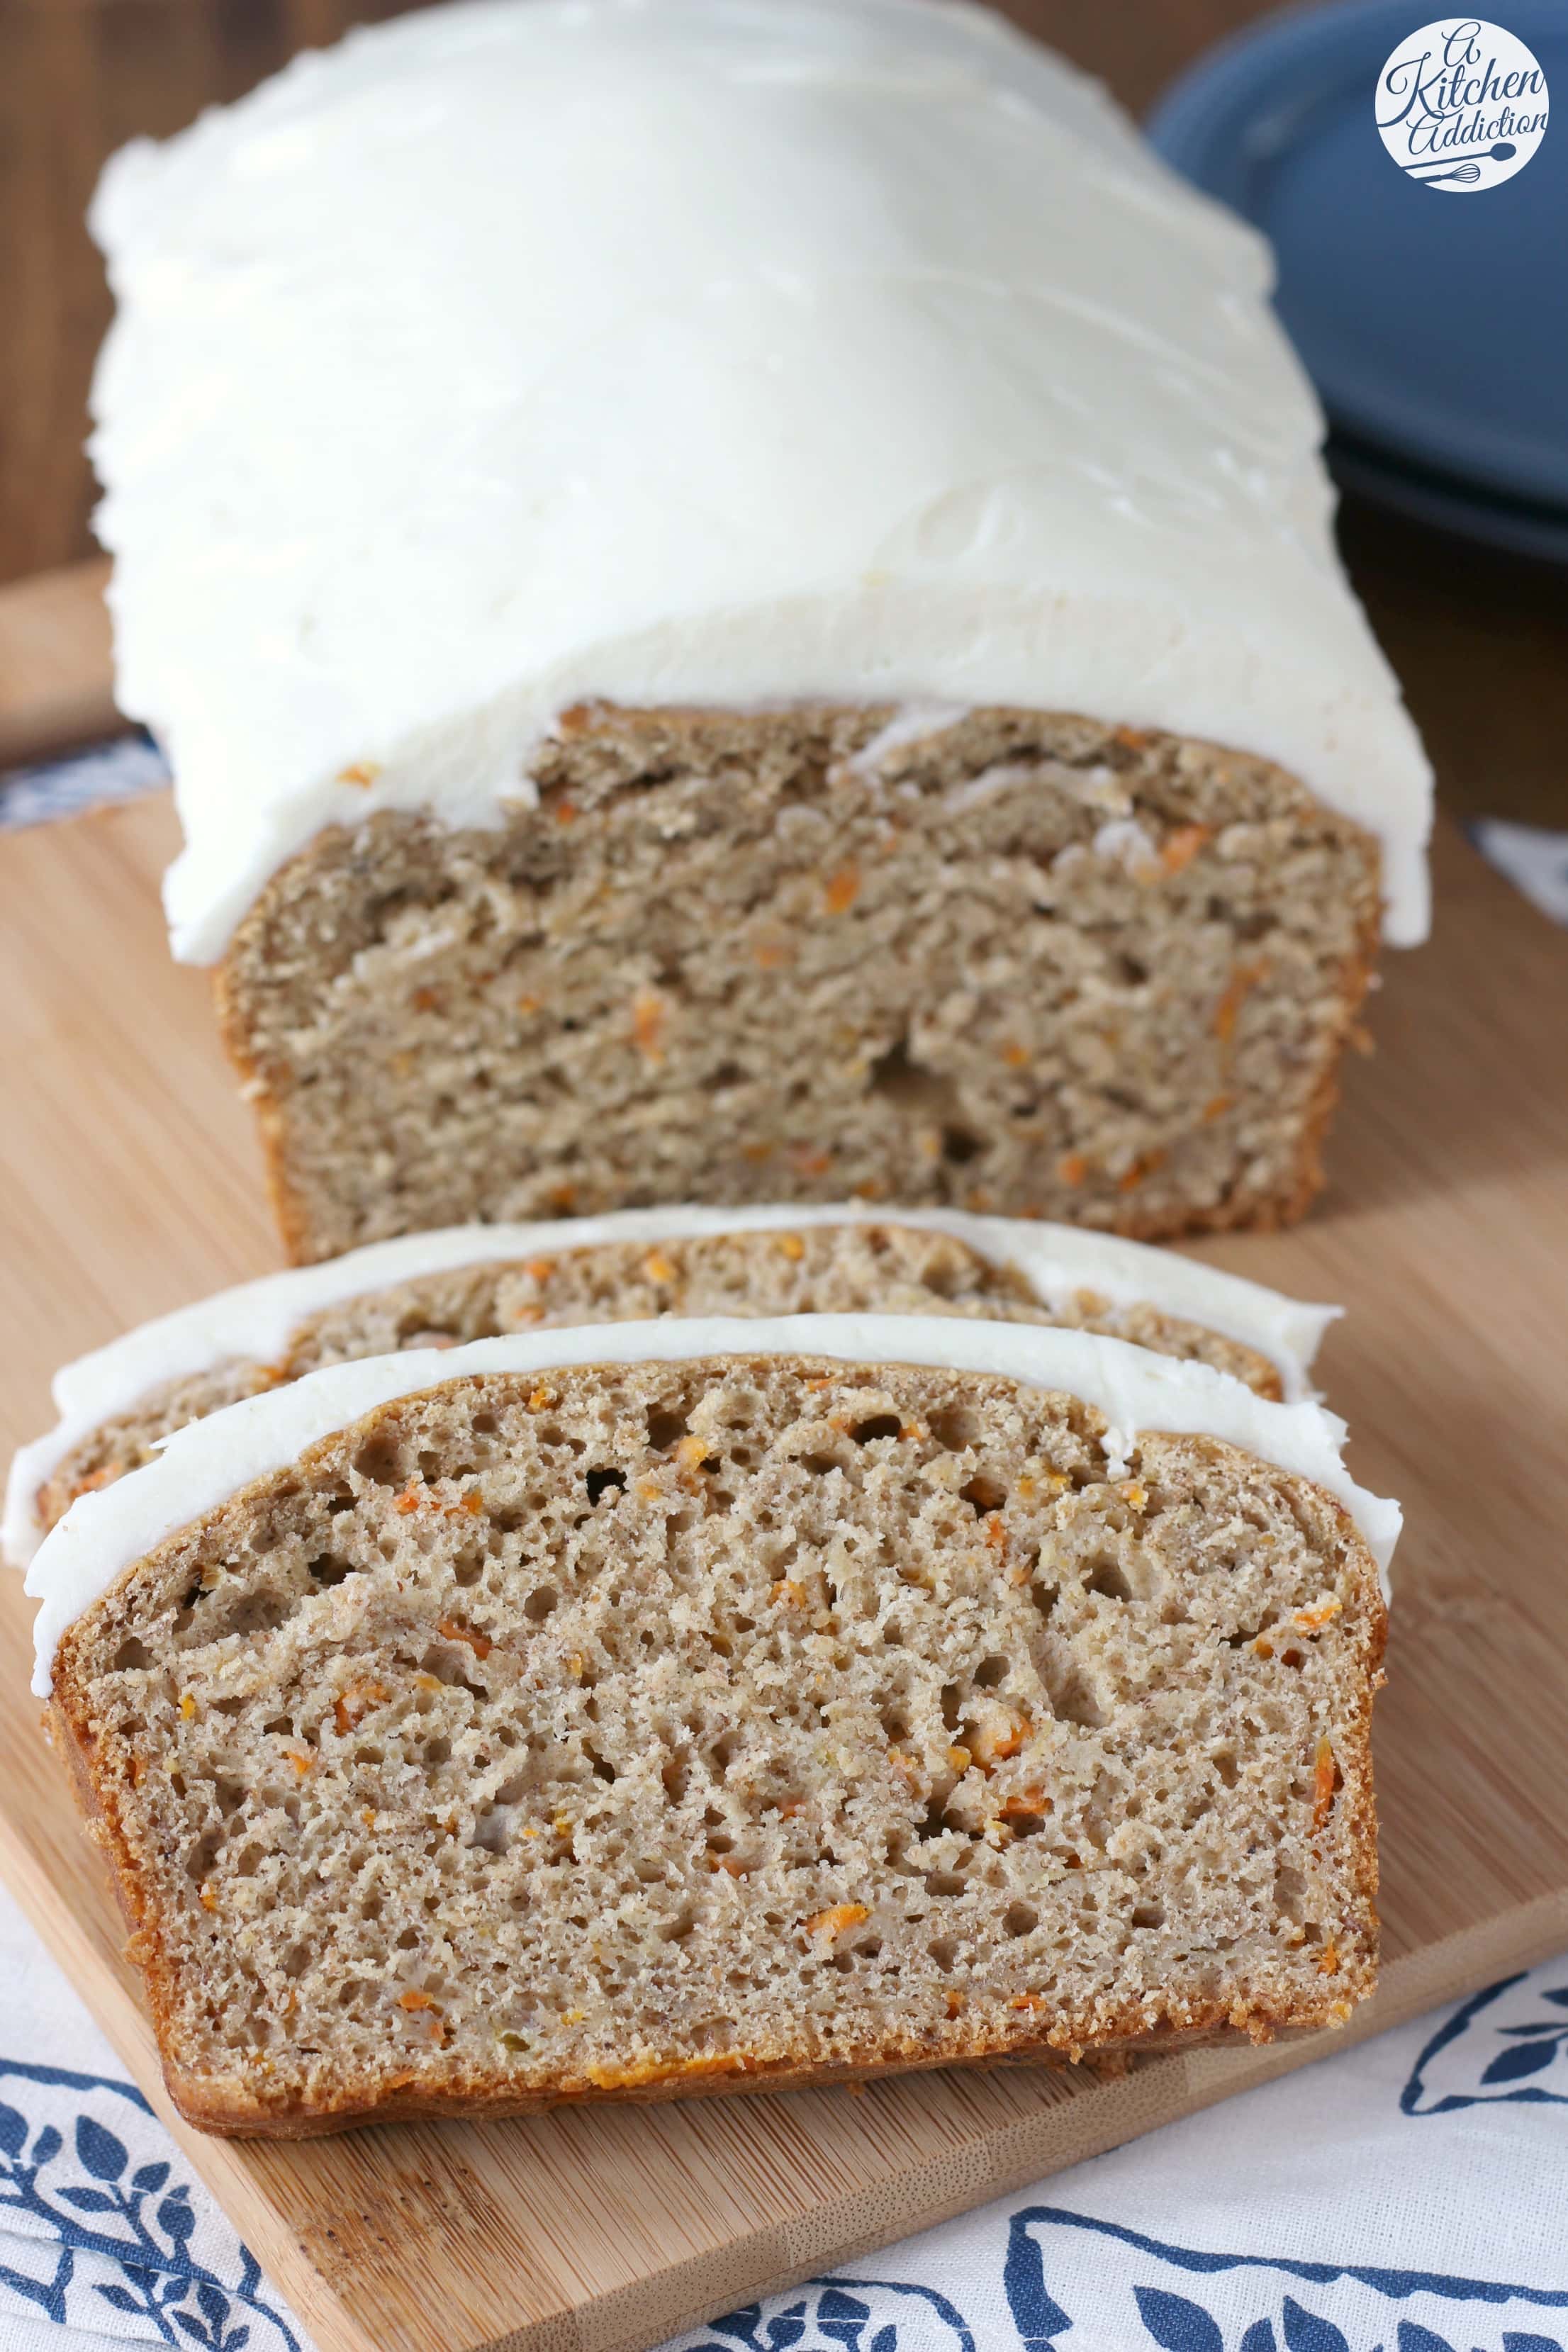 Carrot Cake Banana Bread with Cream Cheese Frosting Recipe from A Kitchen Addiction